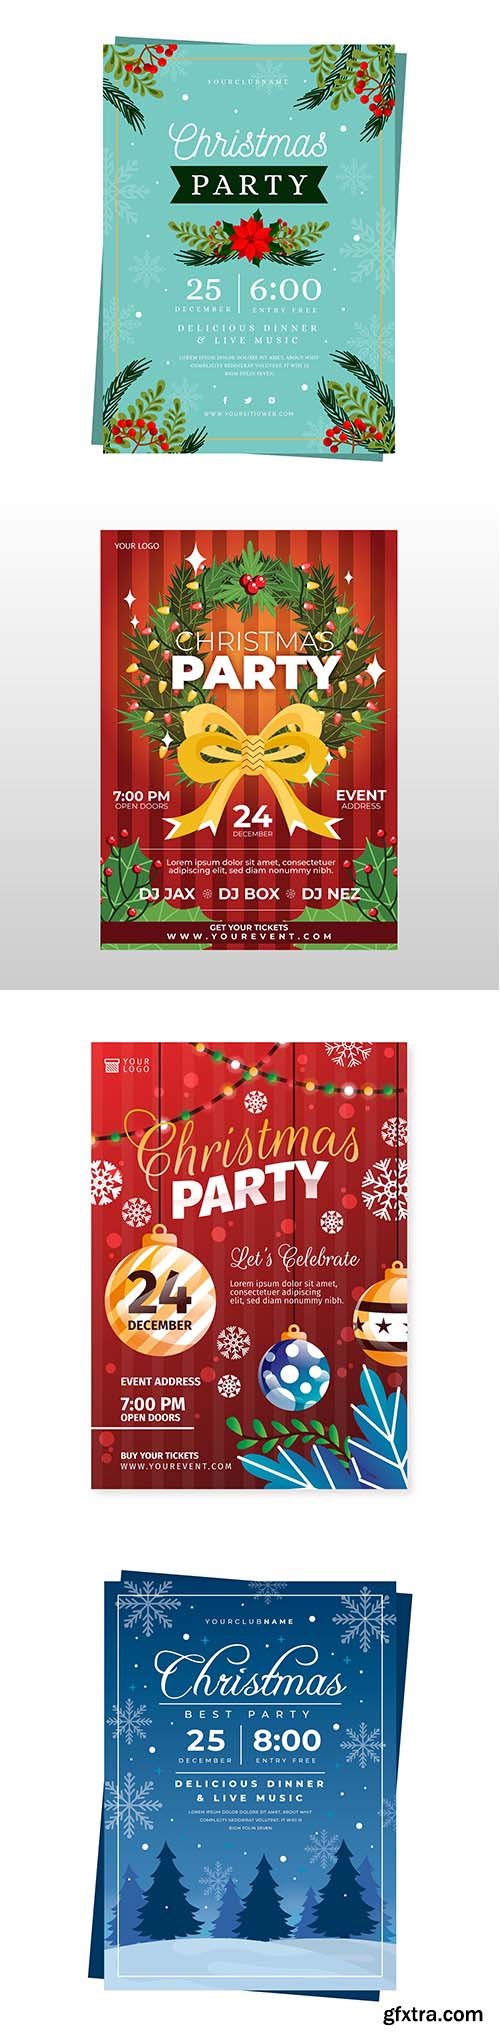 Flat design christmas party template poster